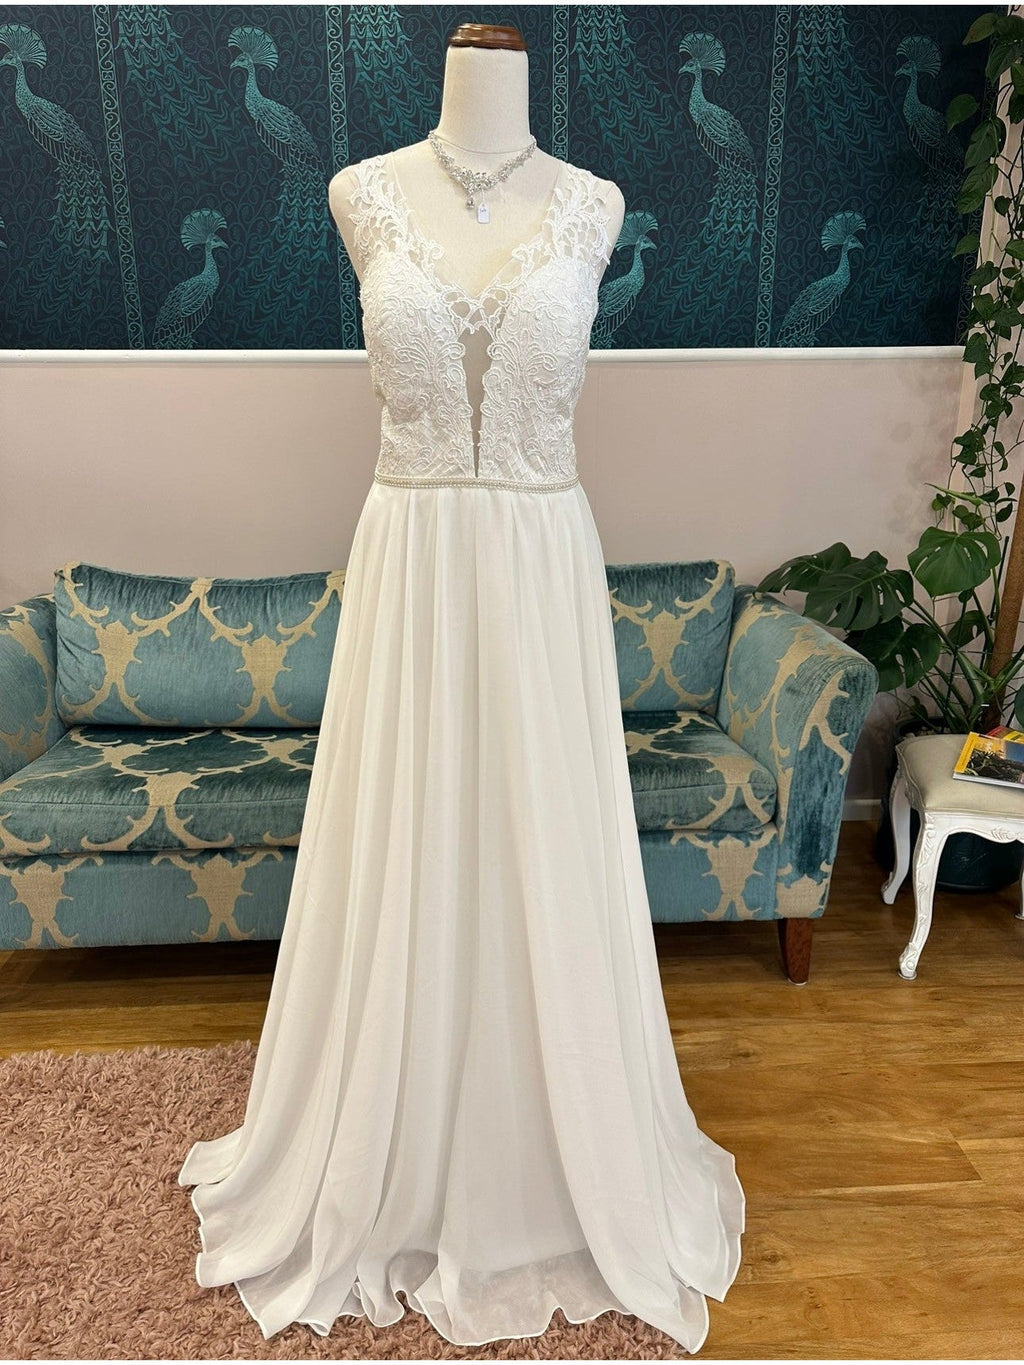 Faye Ivory wedding gown with lace bodice and chiffon skirt size 14 Express NZ wide - Bay Bridal and Ball Gowns